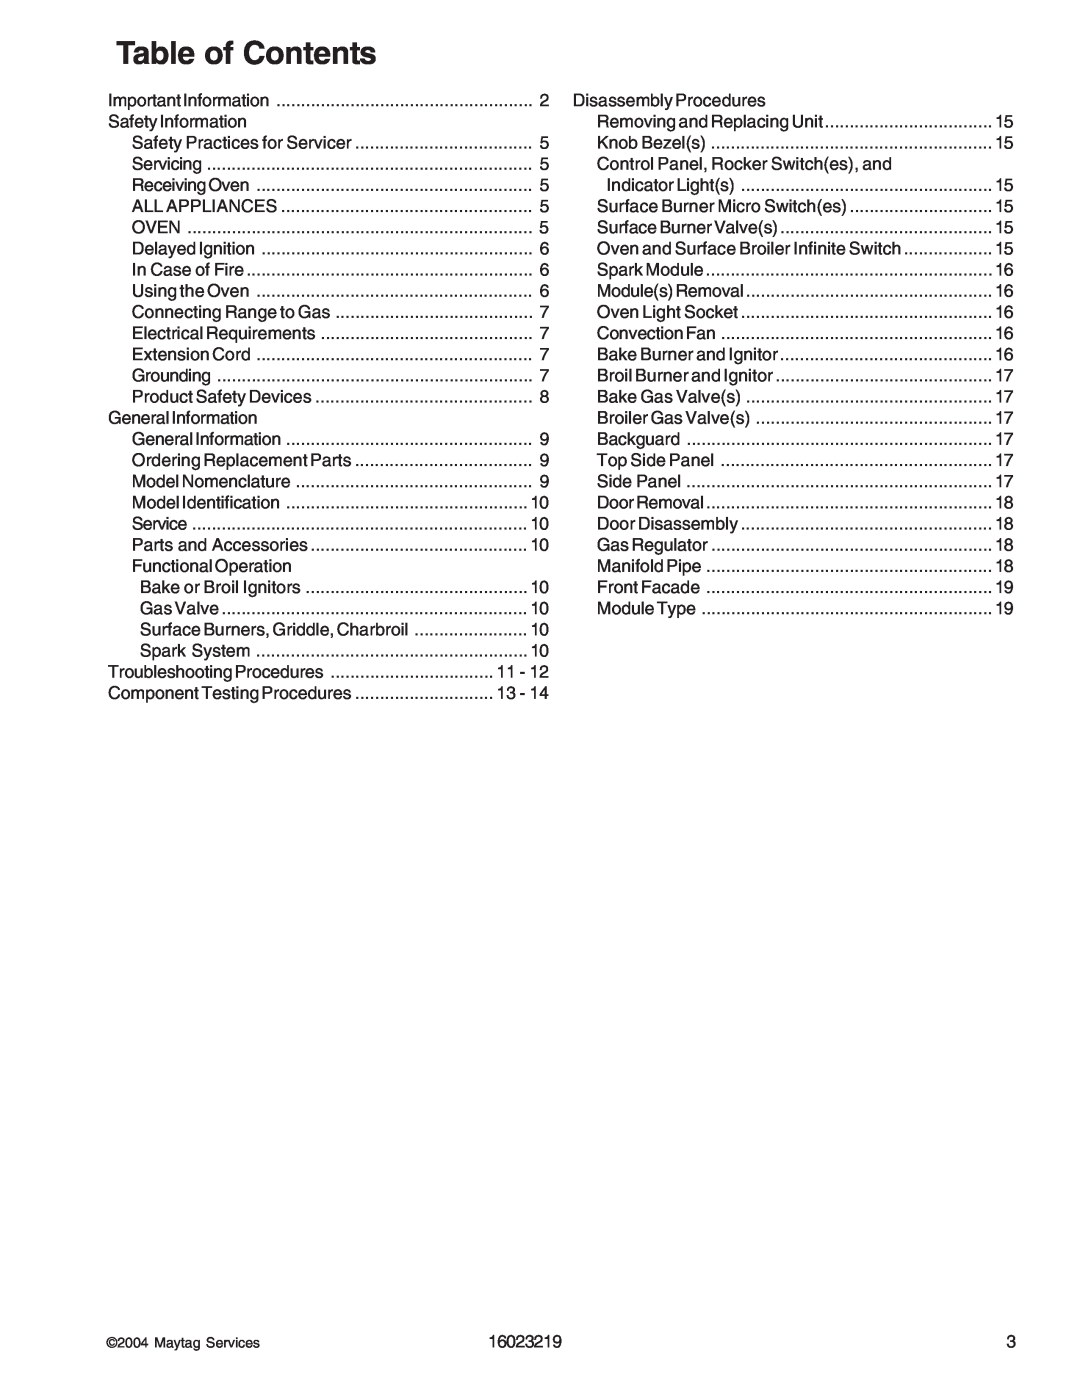 Maytag DGRSC, RJGR manual Table of Contents 